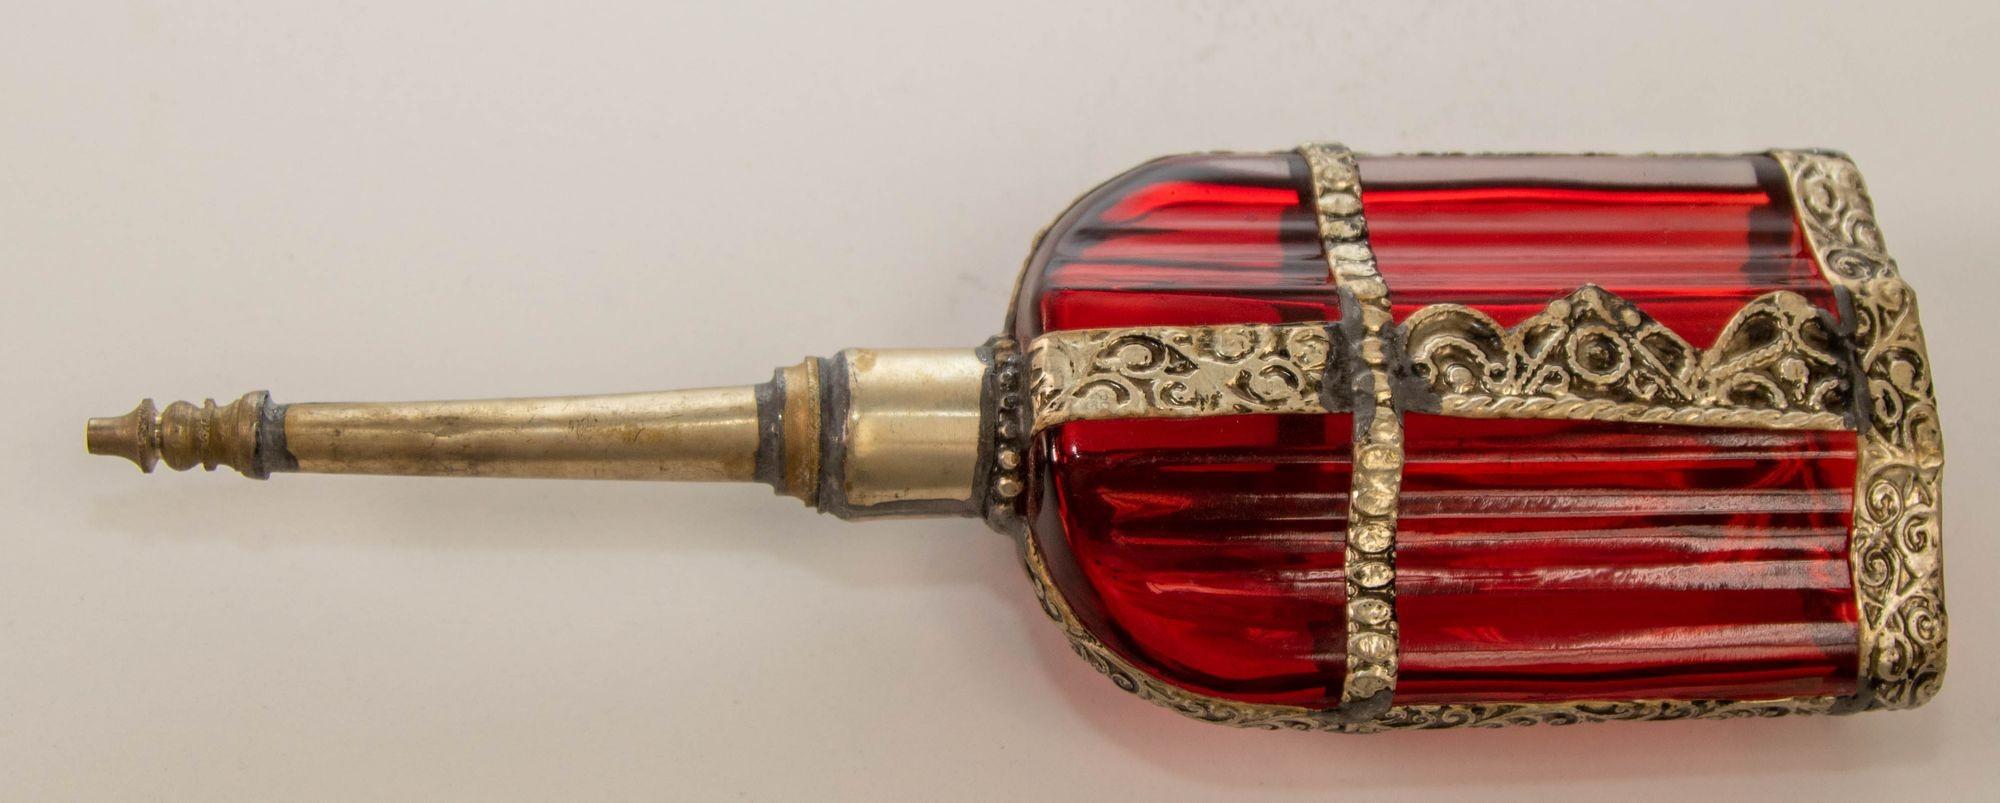 Moroccan Perfume Bottle Sprinkler with Embossed Metal Overlay and Red Glass For Sale 1